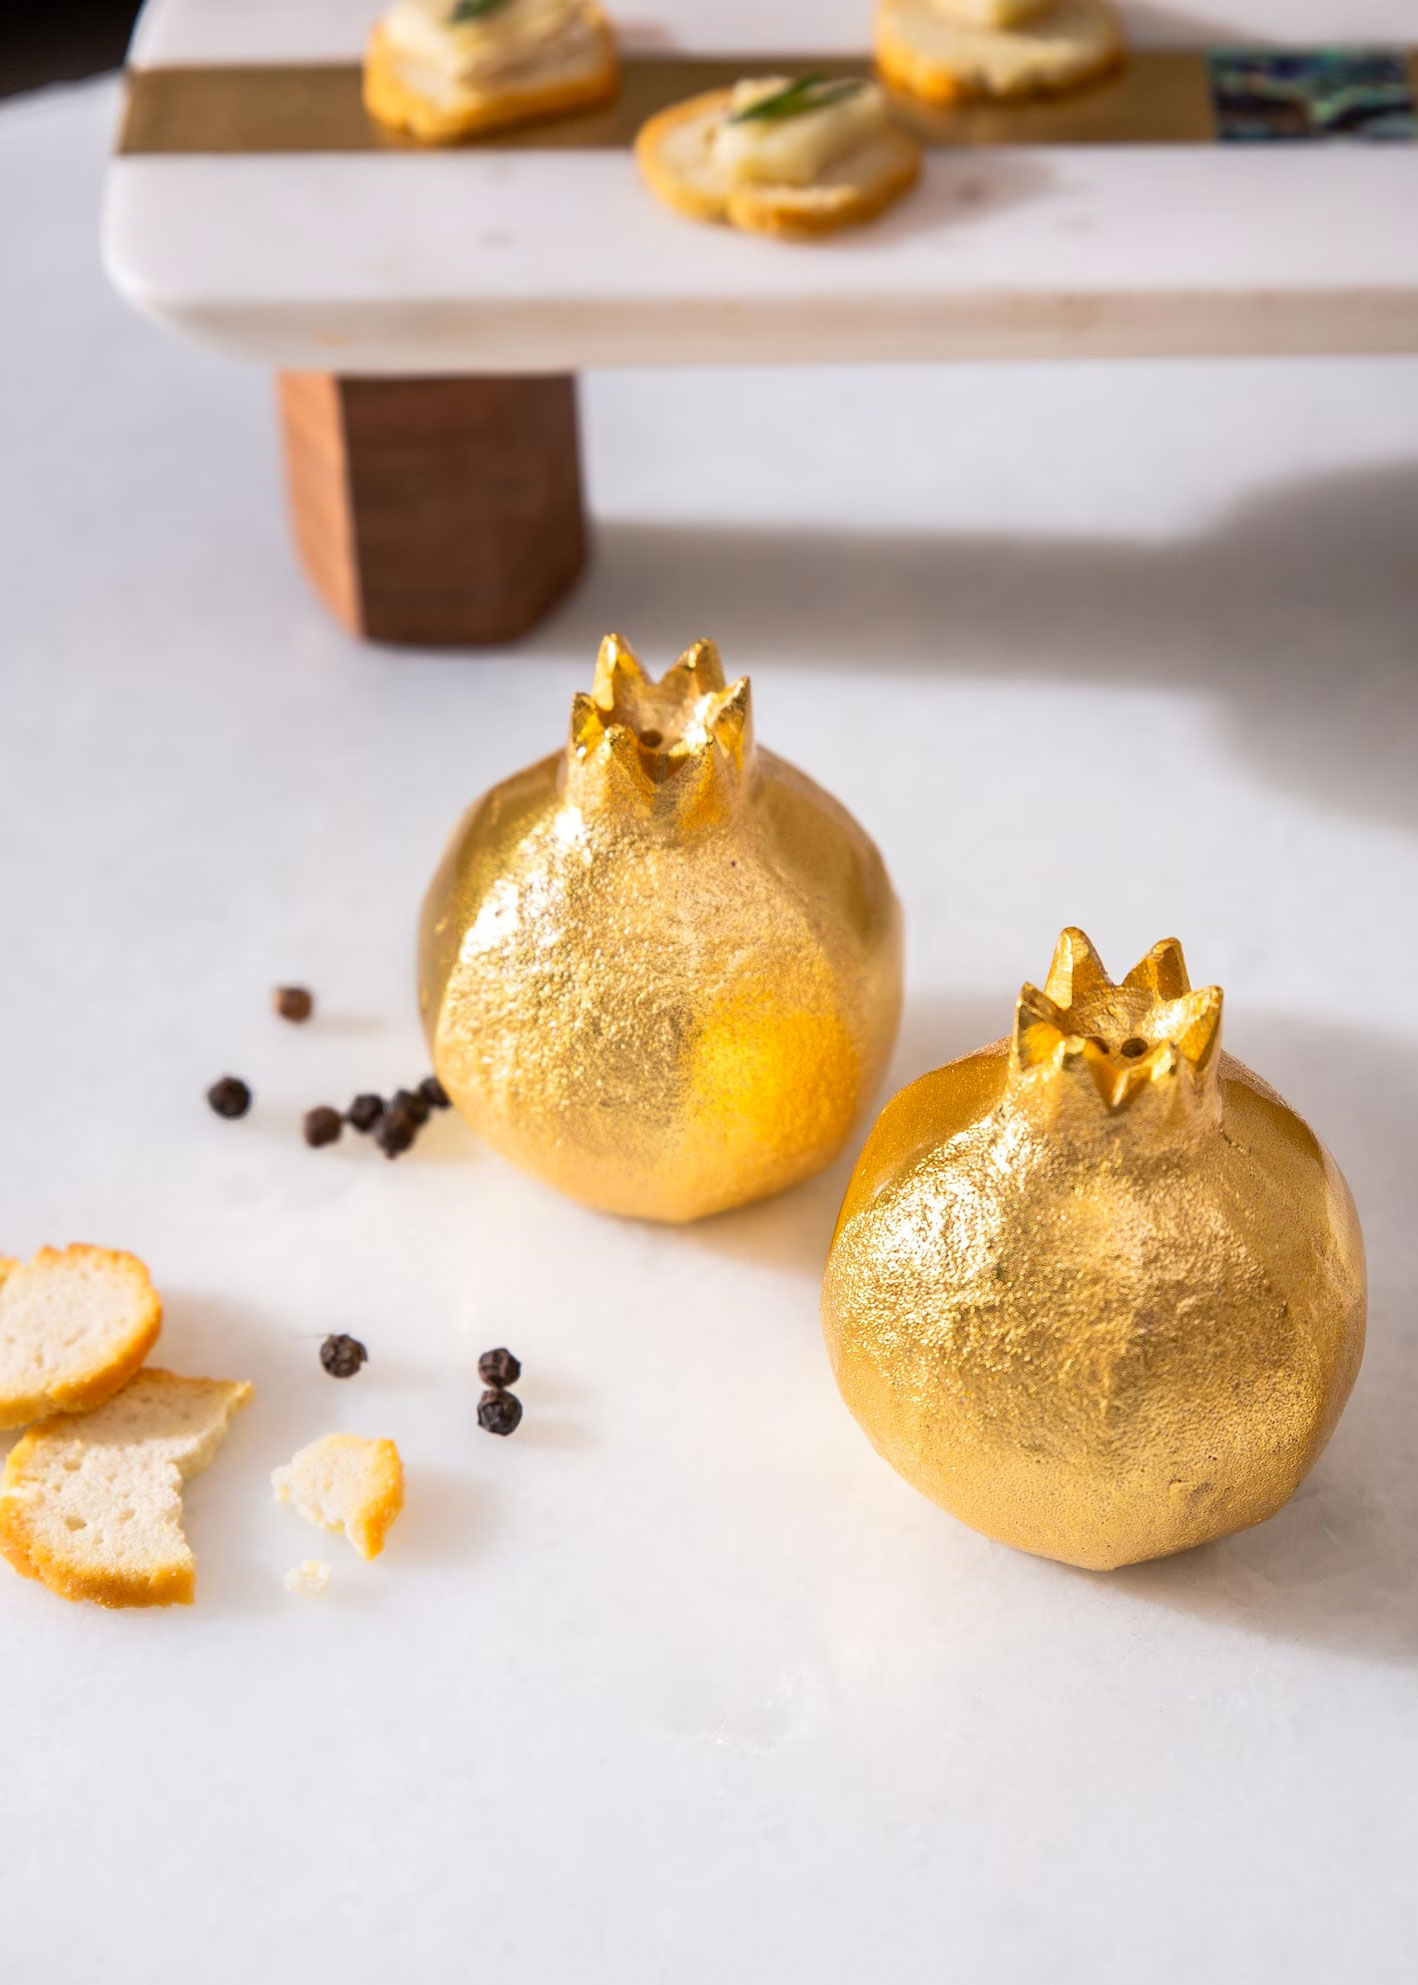 gold salt cellars in cute pomegranate shapes from Serein Decor on Etsy.